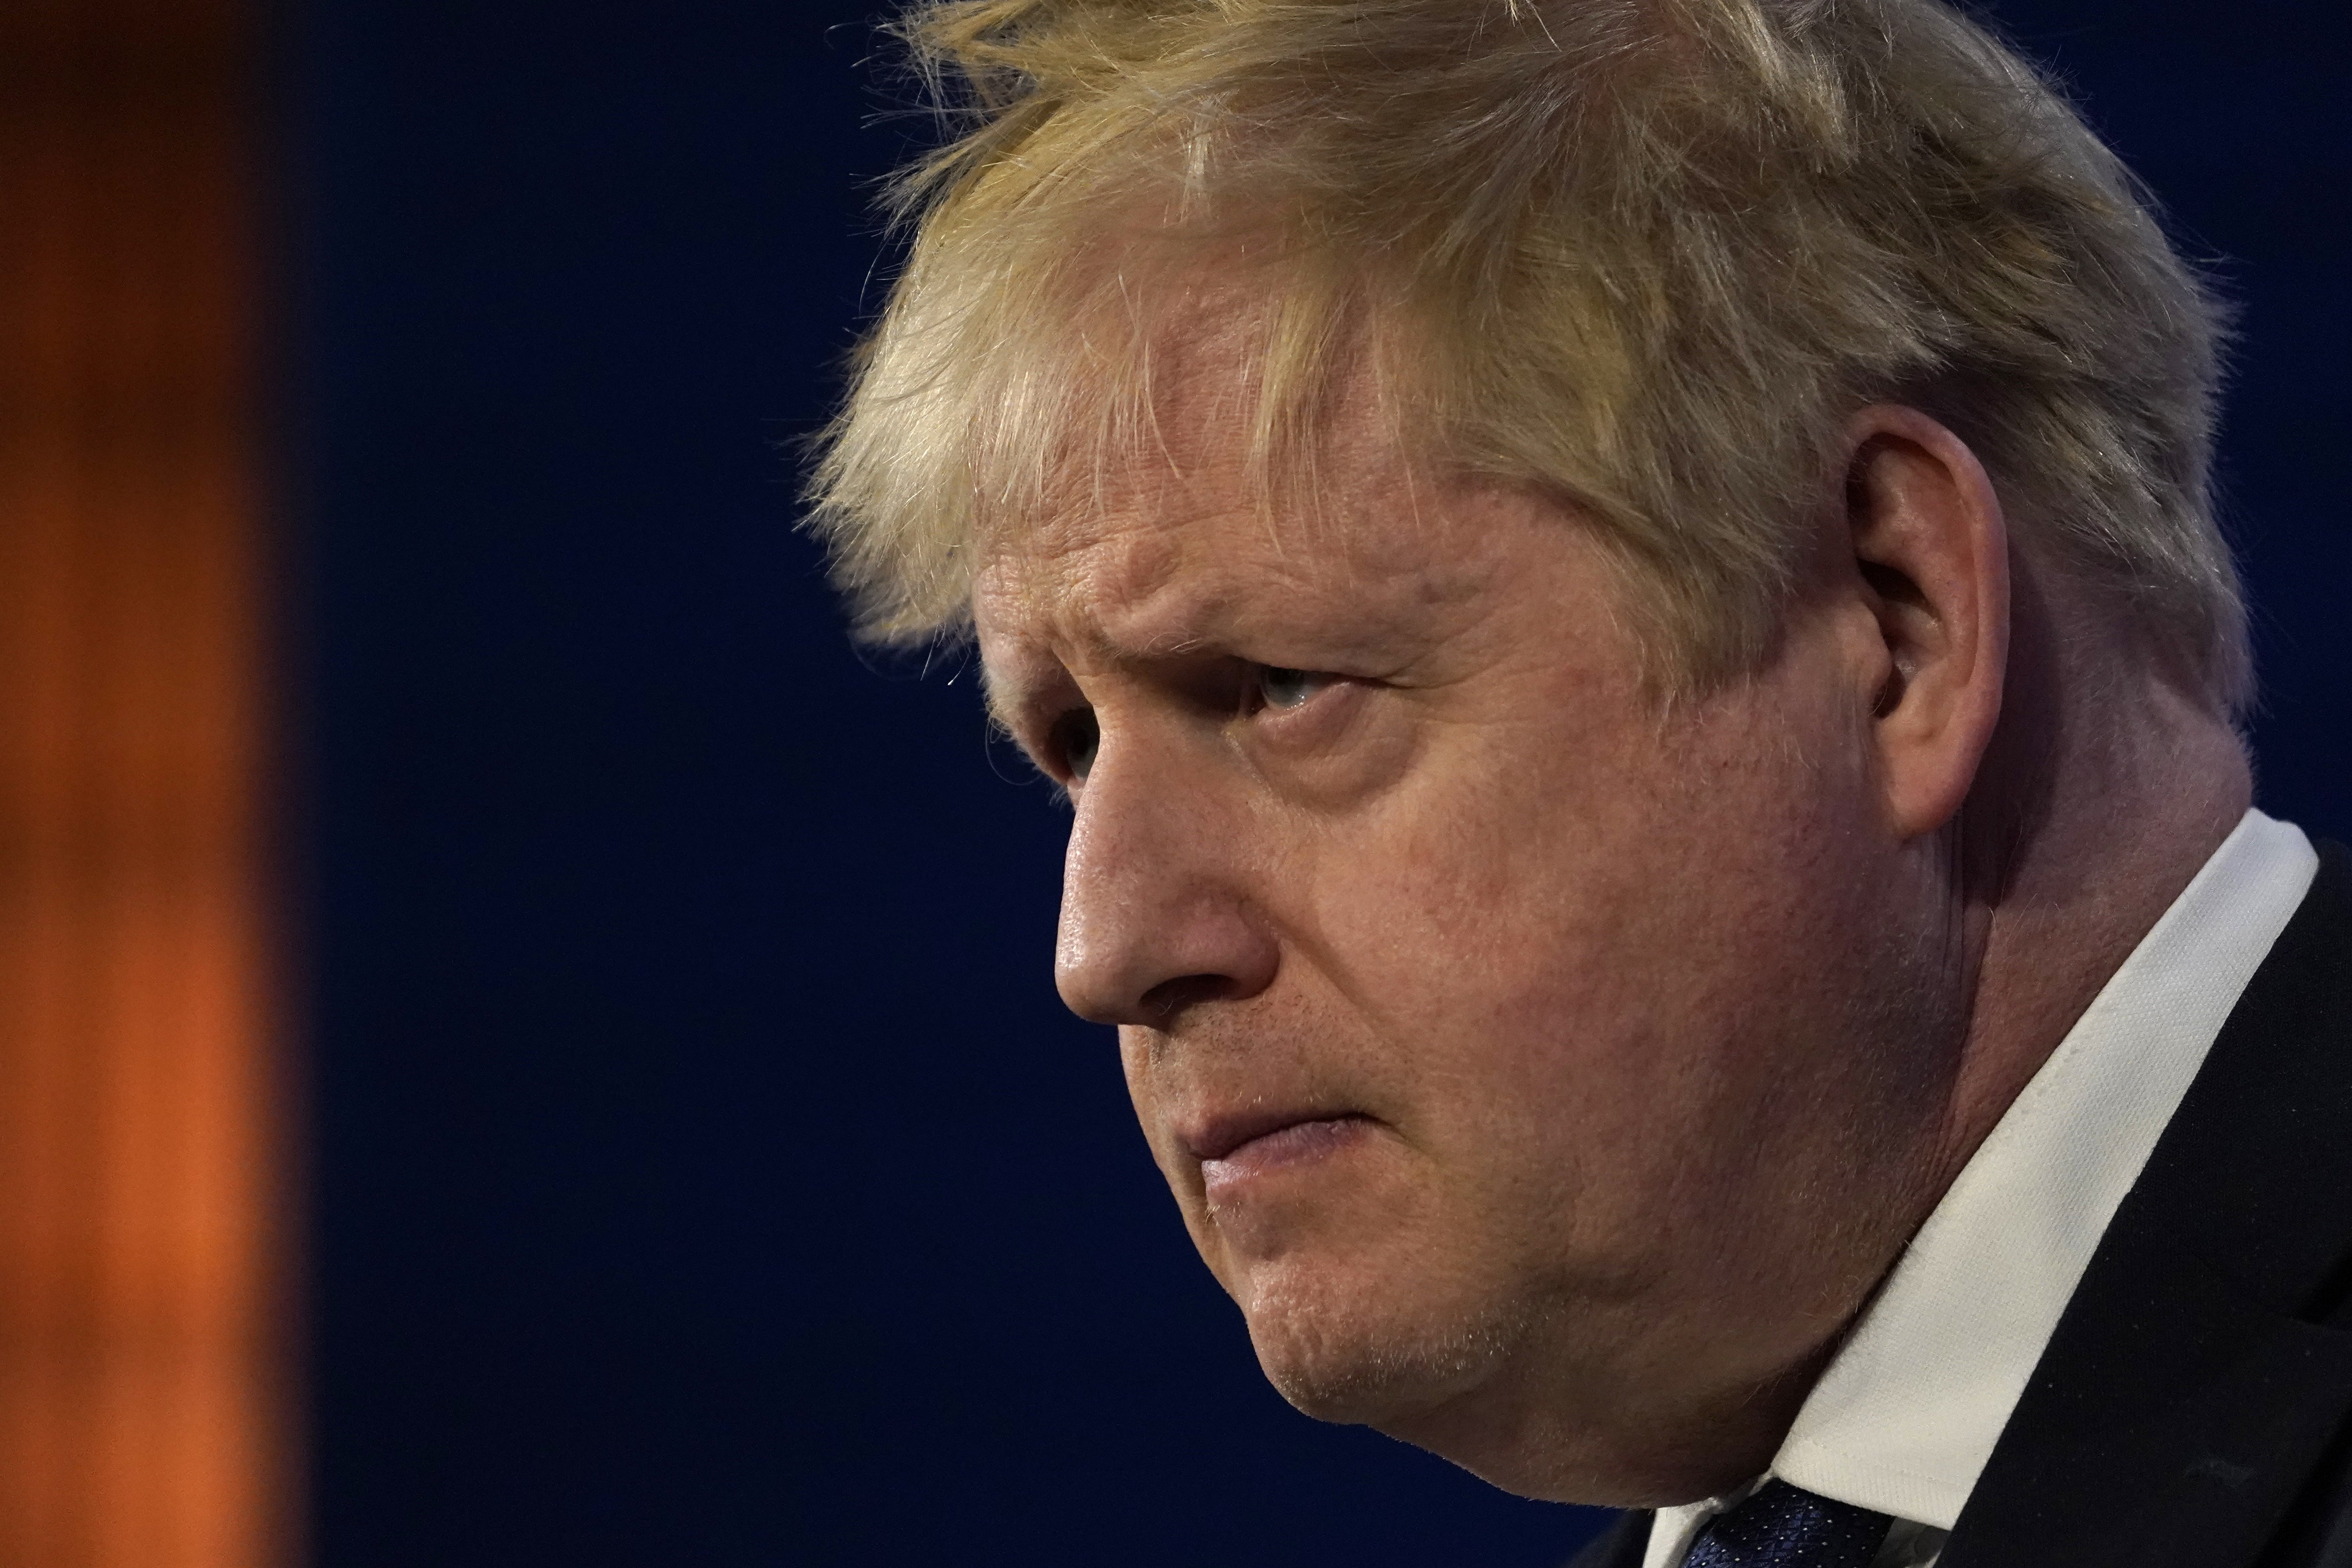 Prime Minister Boris Johnson during a press conference at Downing Street in London (Alberto Pezzali/PA)